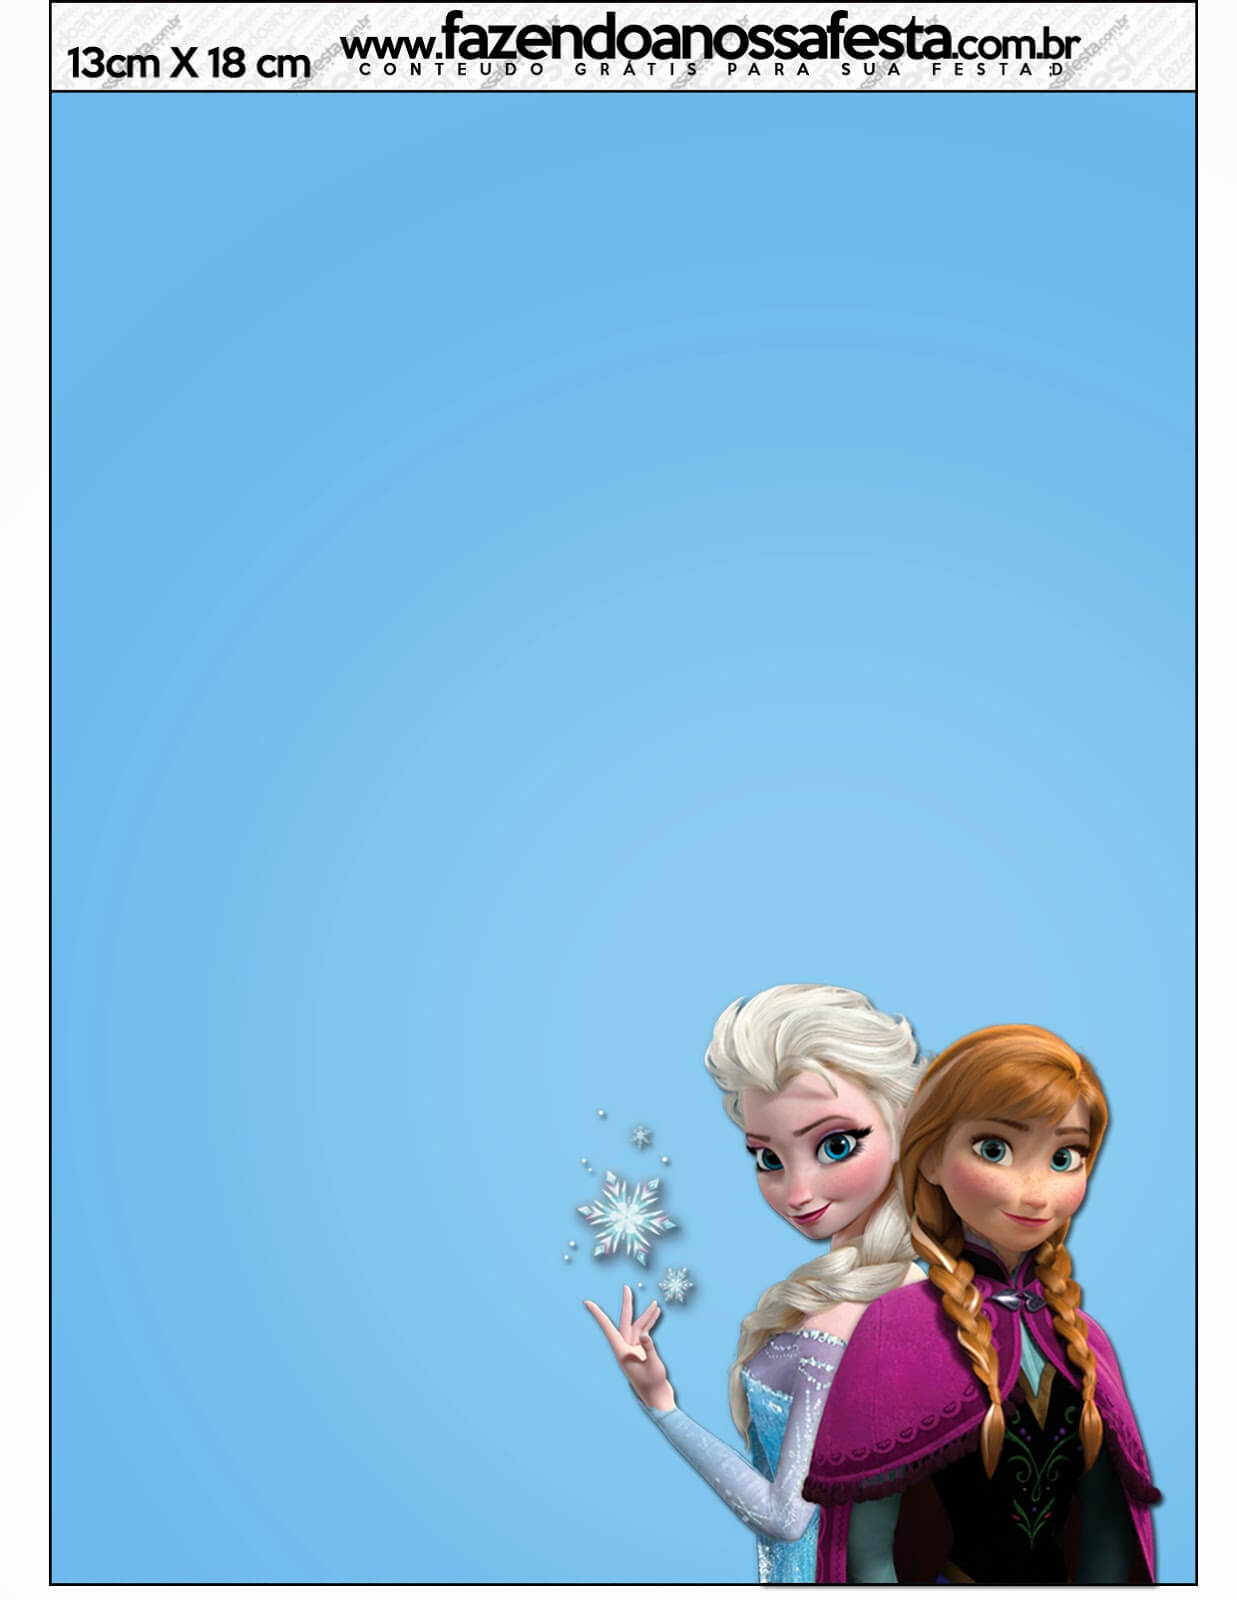 frozen-free-printable-cards-or-party-invitations-oh-my-intended-for-frozen-birthday-card